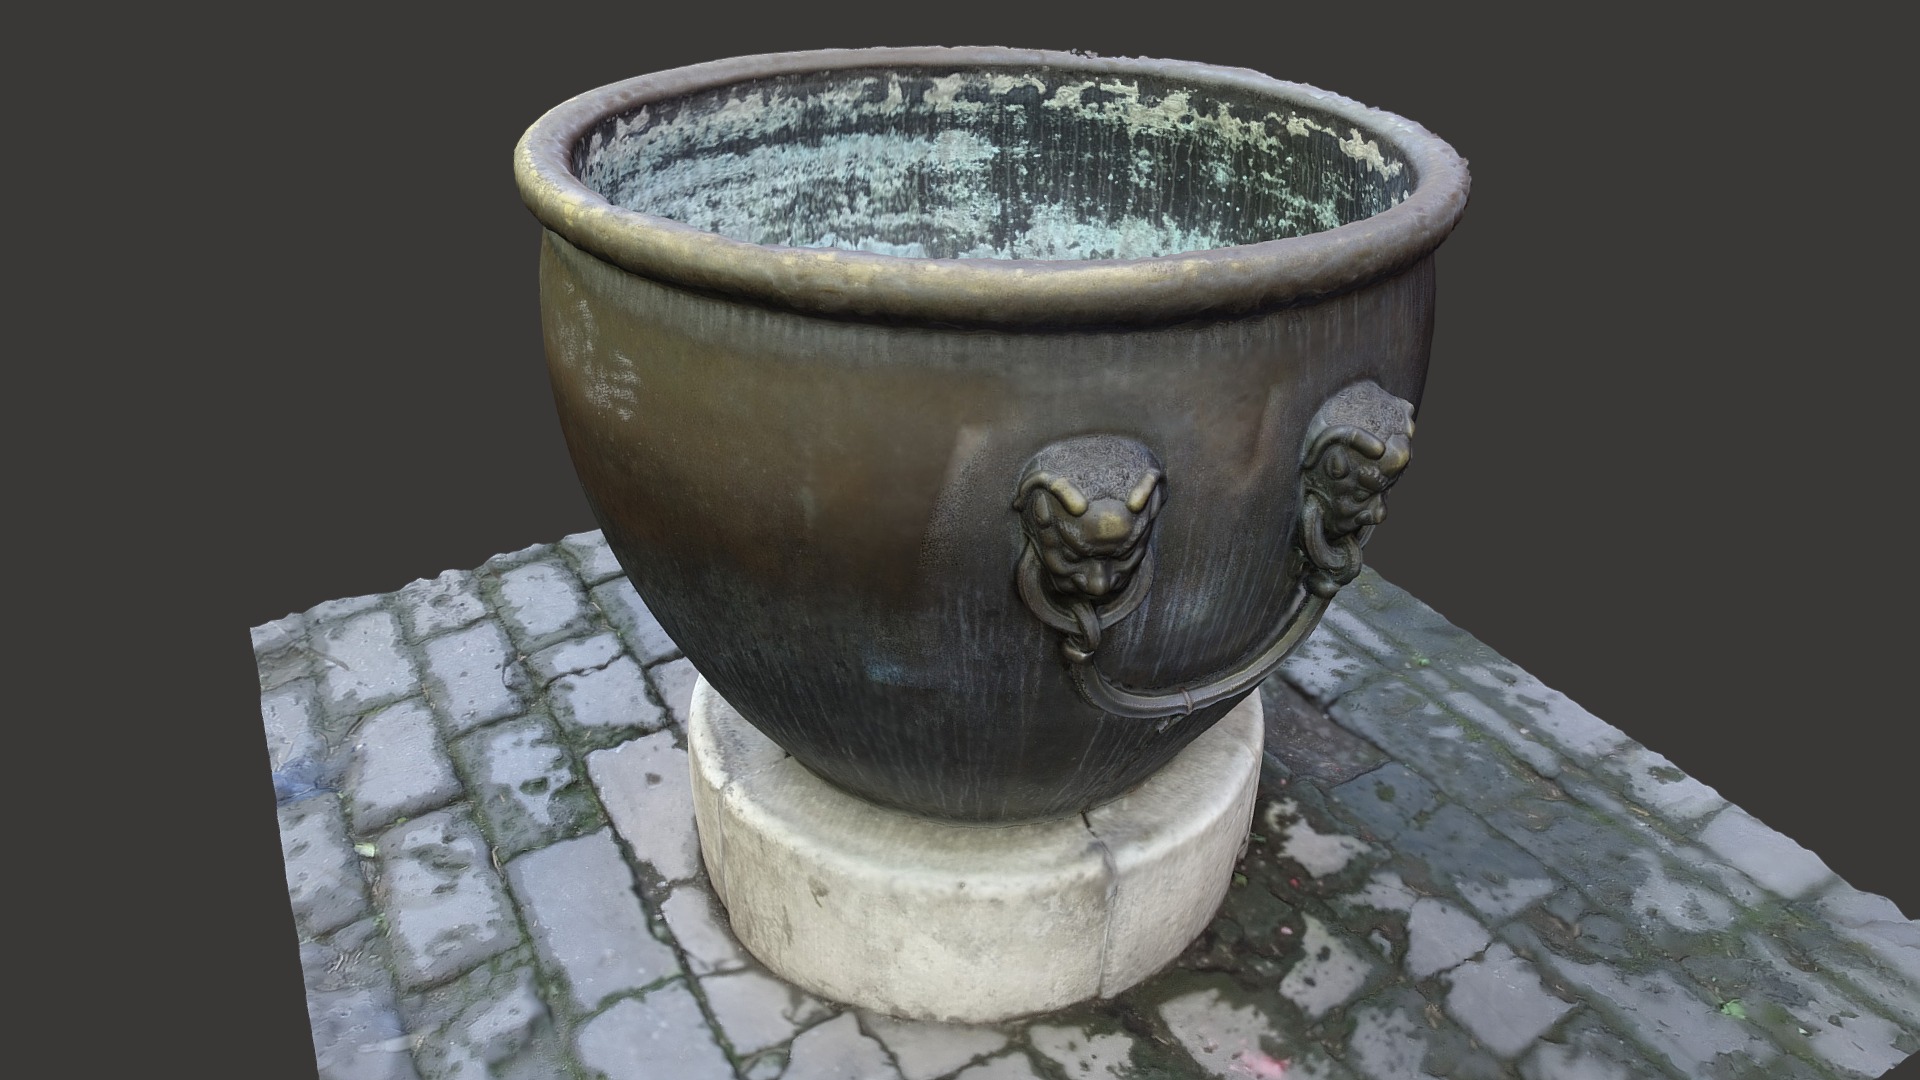 3D model 2016-09 – Beijing 08 - This is a 3D model of the 2016-09 - Beijing 08. The 3D model is about a large metal pot.